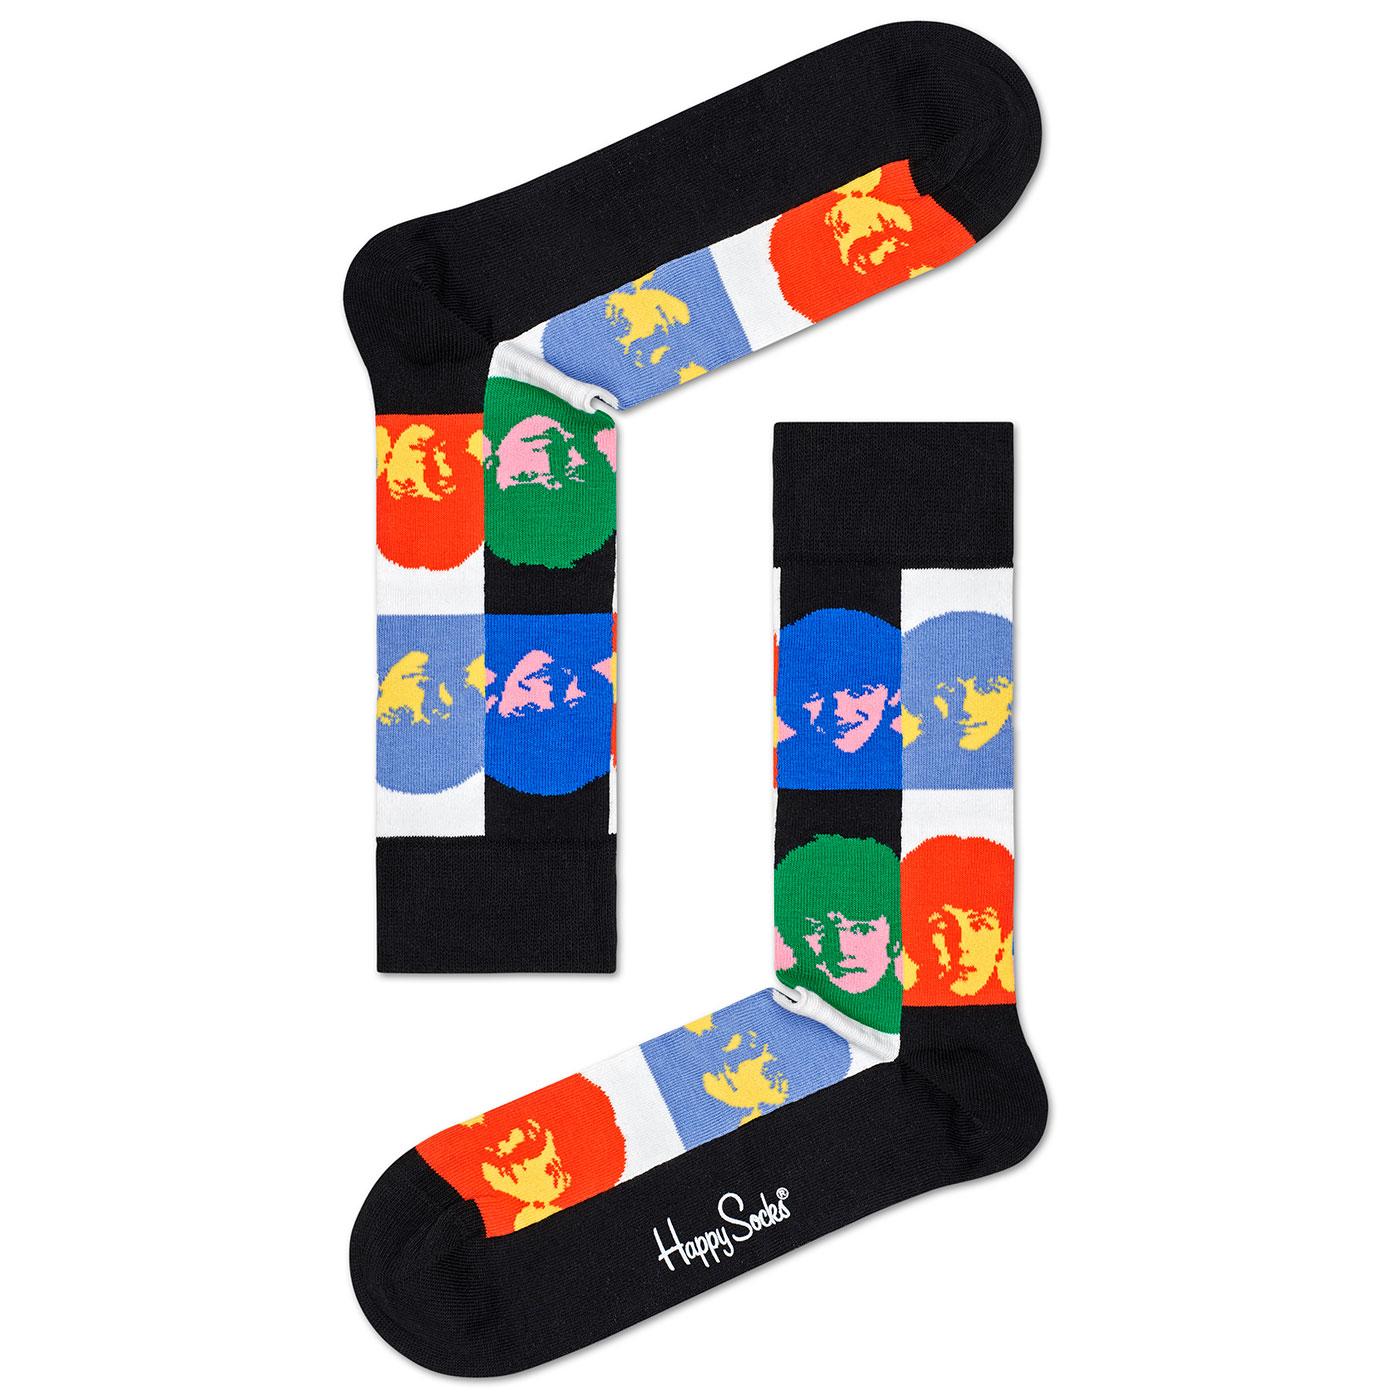 + HAPPY SOCKS x THE BEATLES All Together Now Socks